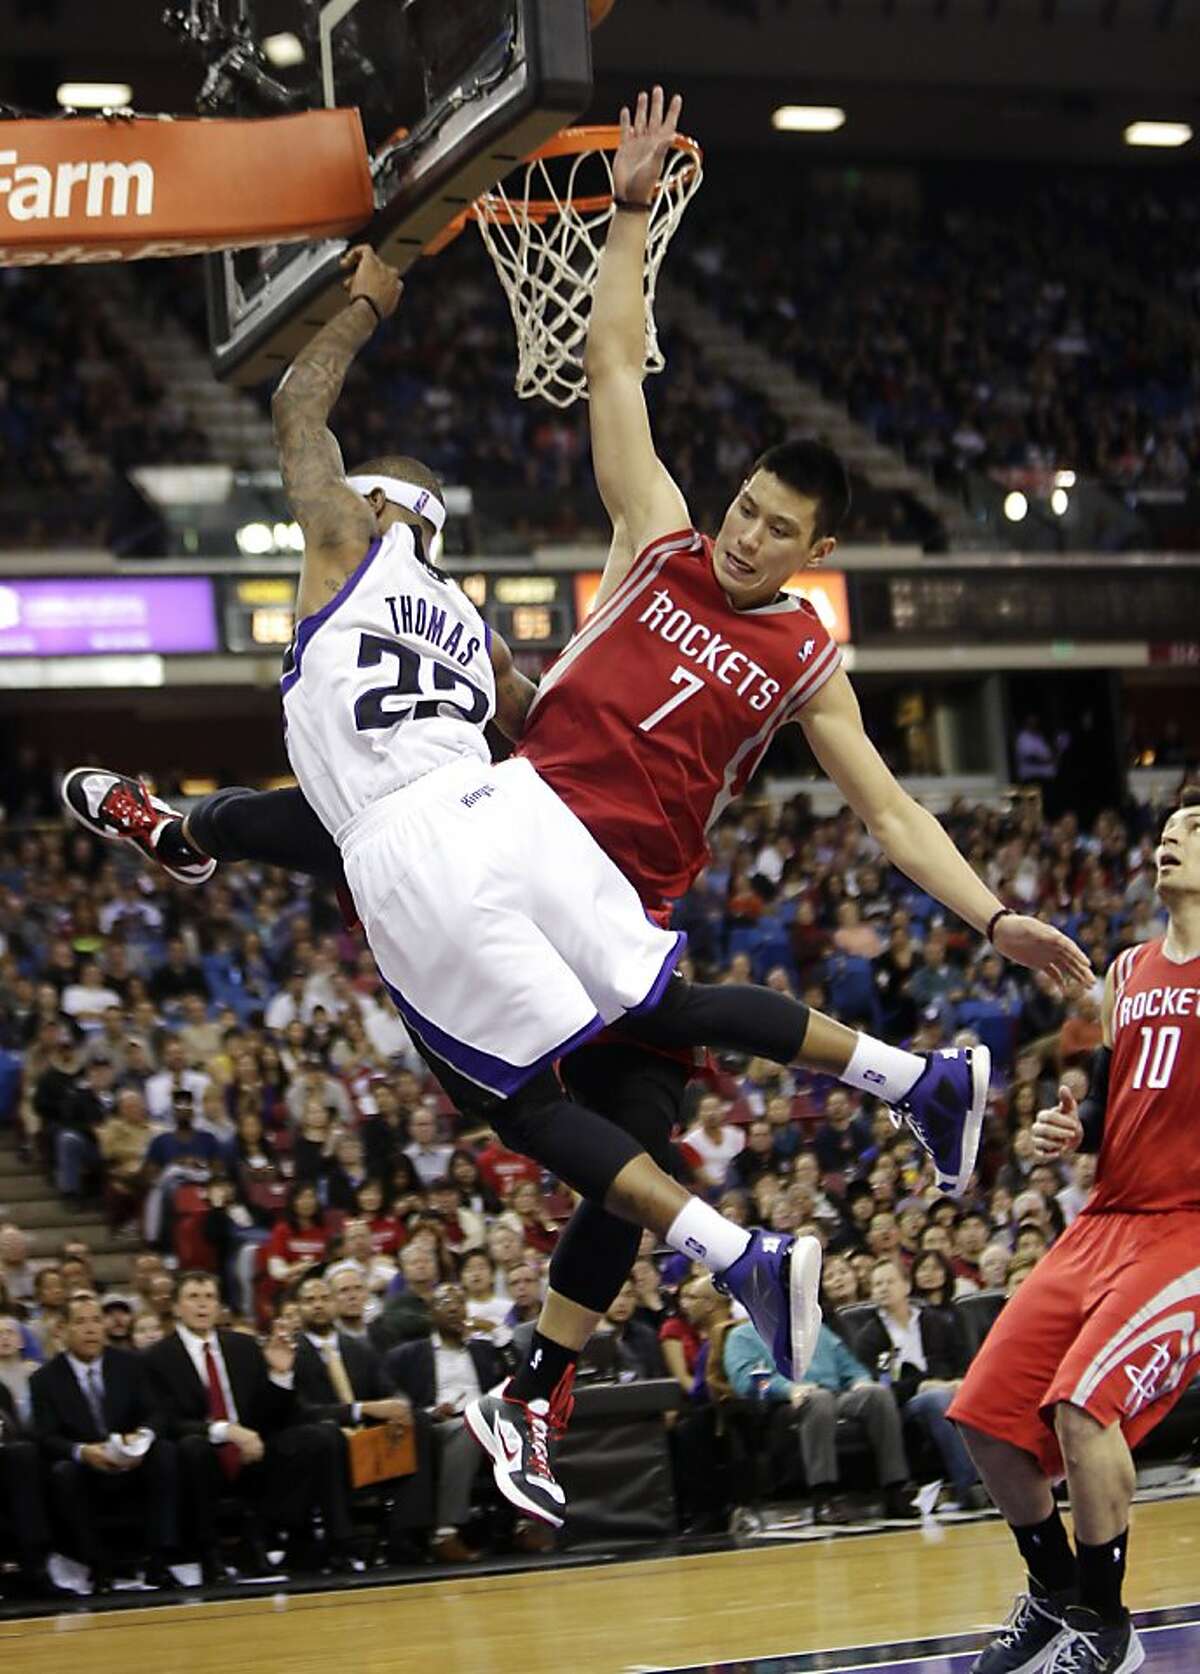 Sacramento Kings guard Isaiah Thomas, left, is fouled by Houston Rockets guard Jeremy Lin during the third quarter of an NBA basketball game in Sacramento, Calif., Sunday, Feb. 10, 2013. The Kings won 117-111. (AP Photo/Rich Pedroncelli)